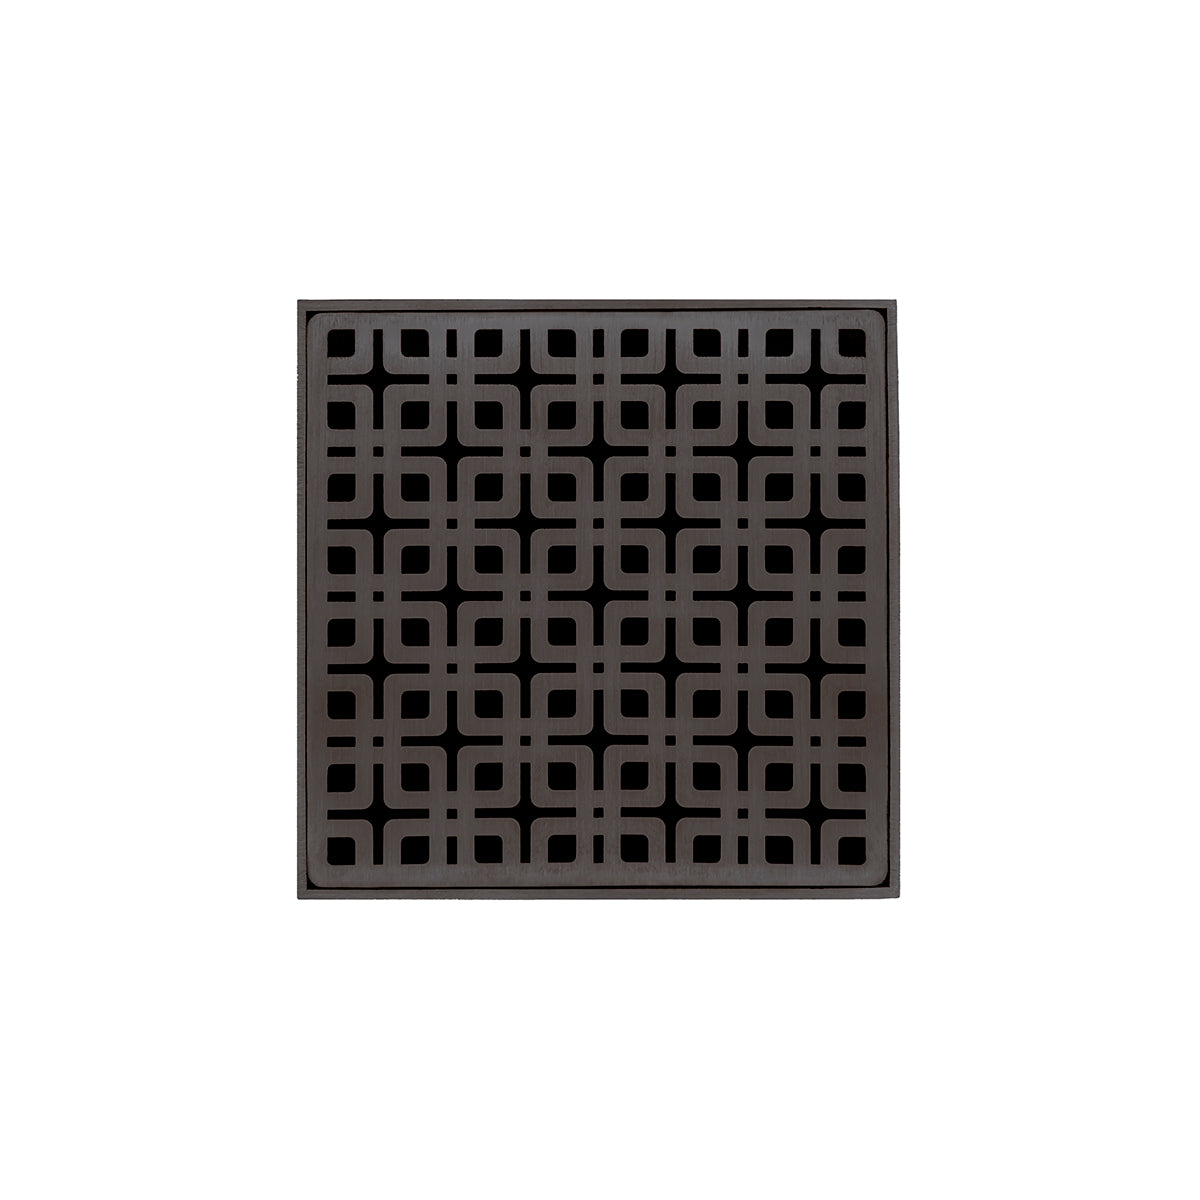 Infinity Drain 5" x 5" KD 5 Premium Center Drain Kit with Link Pattern Decorative Plate with Cast Iron Drain Body, 2" Outlet